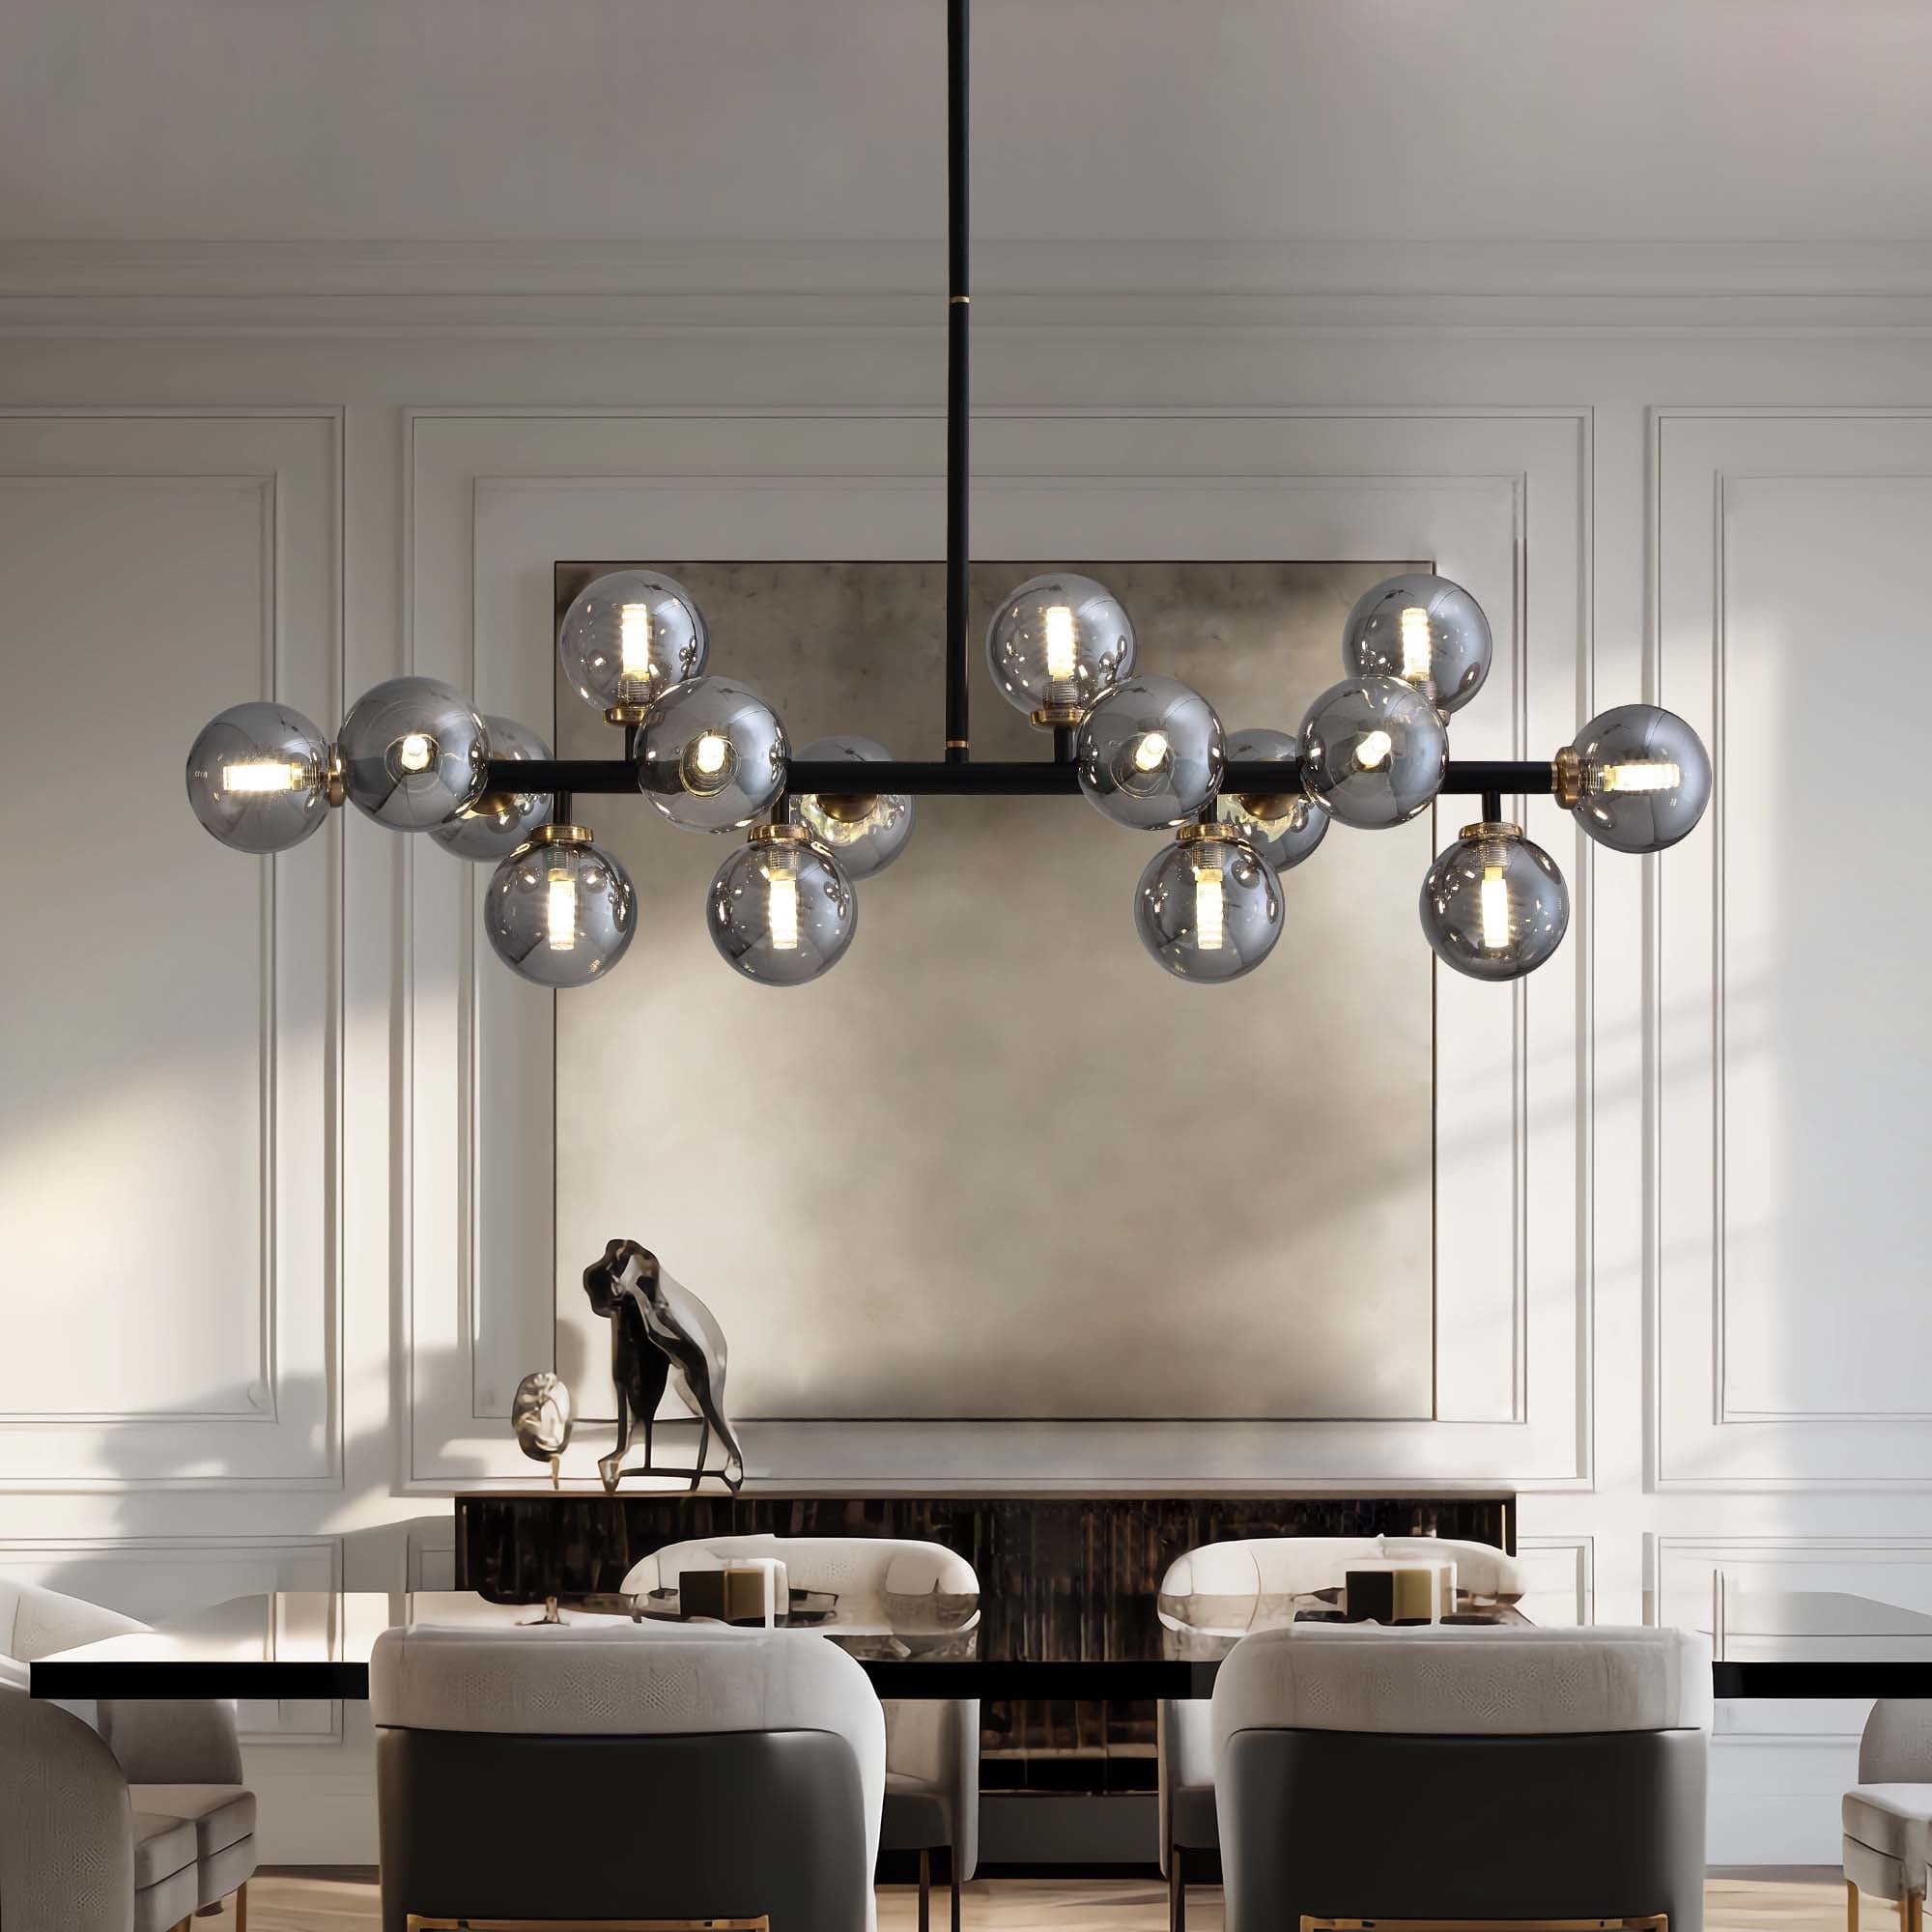 Antoine Modern Linear Dining Room Chandelier 16-Light rated Black in Smoke Glass Dry the and Gray Chandeliers department Modern/Contemporary at Globe